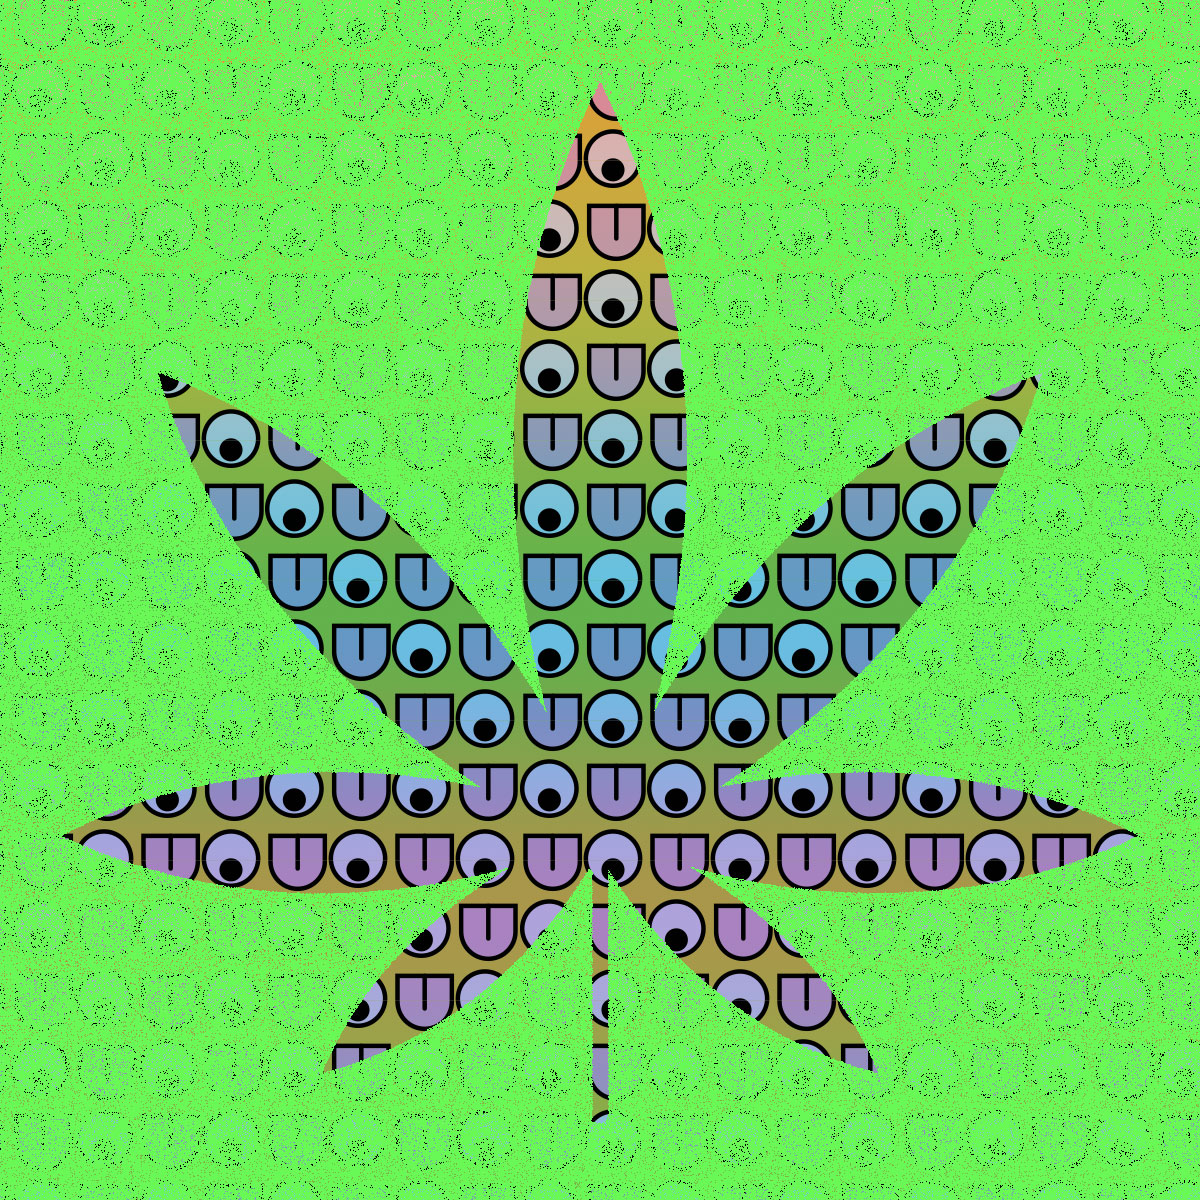 Funky cannabis leaf made of eyes and tongues